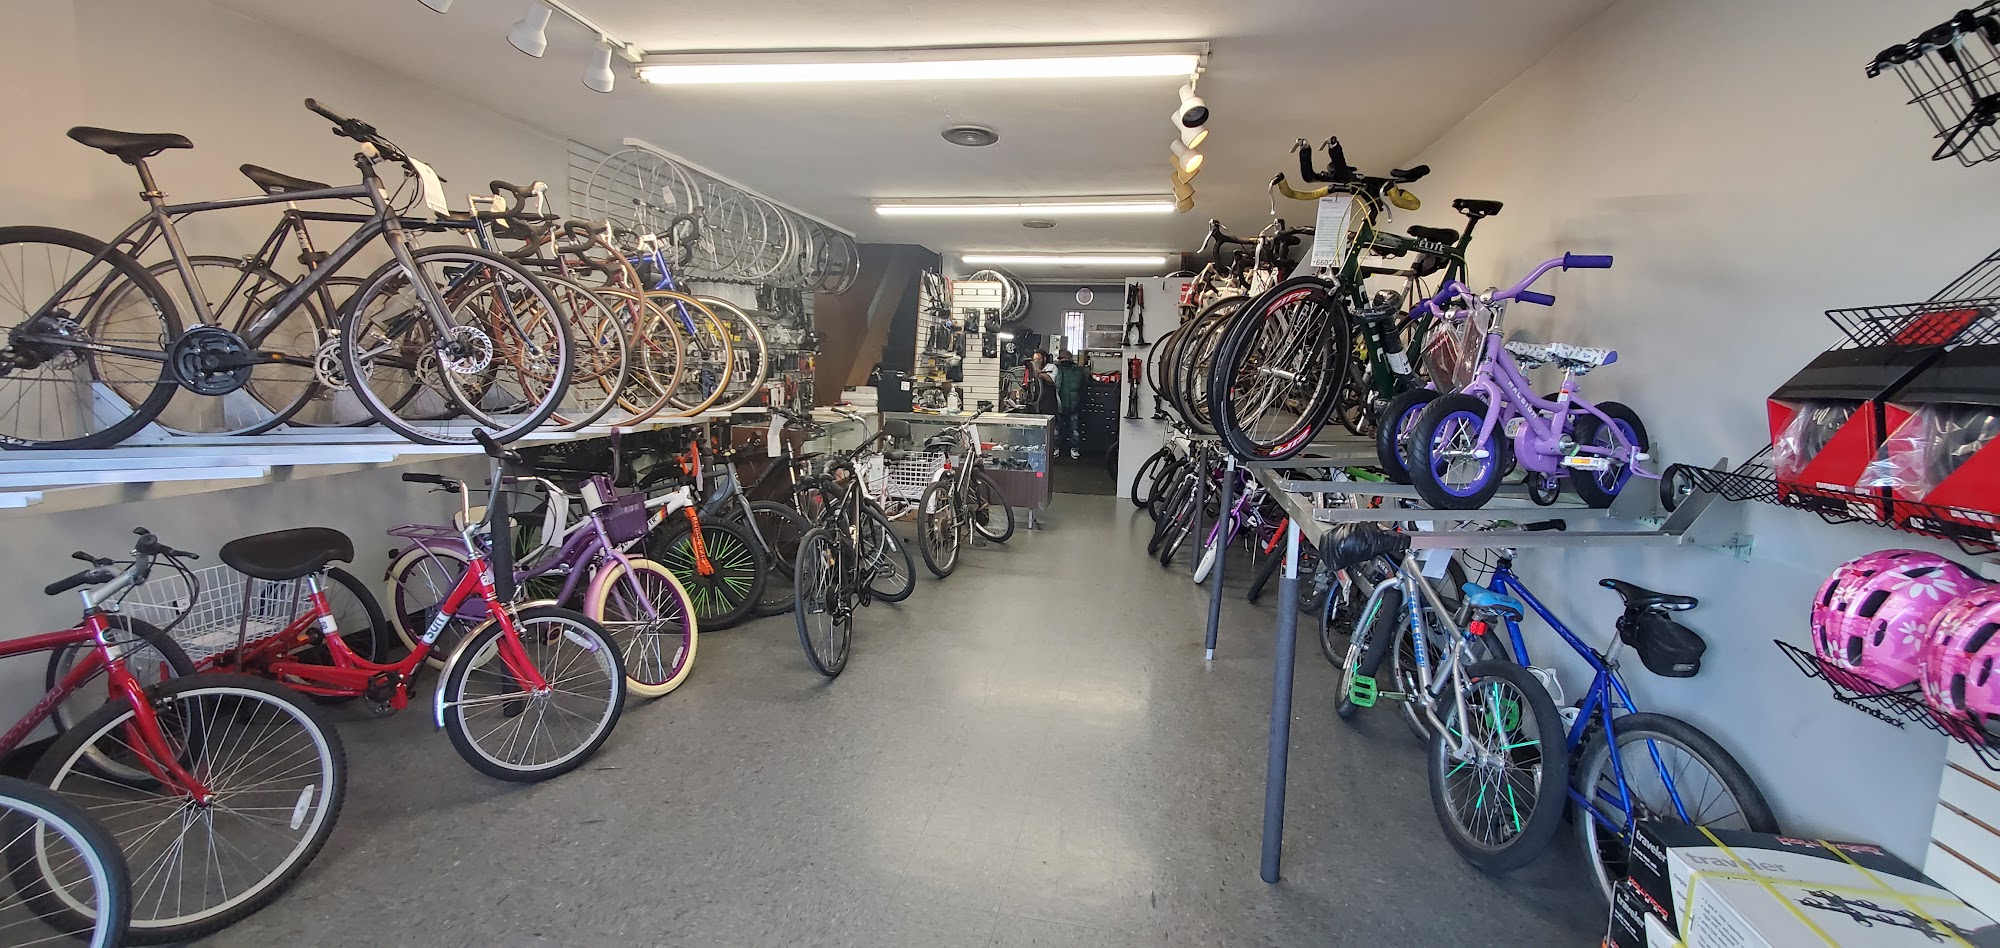 Drexel Hill Cyclery